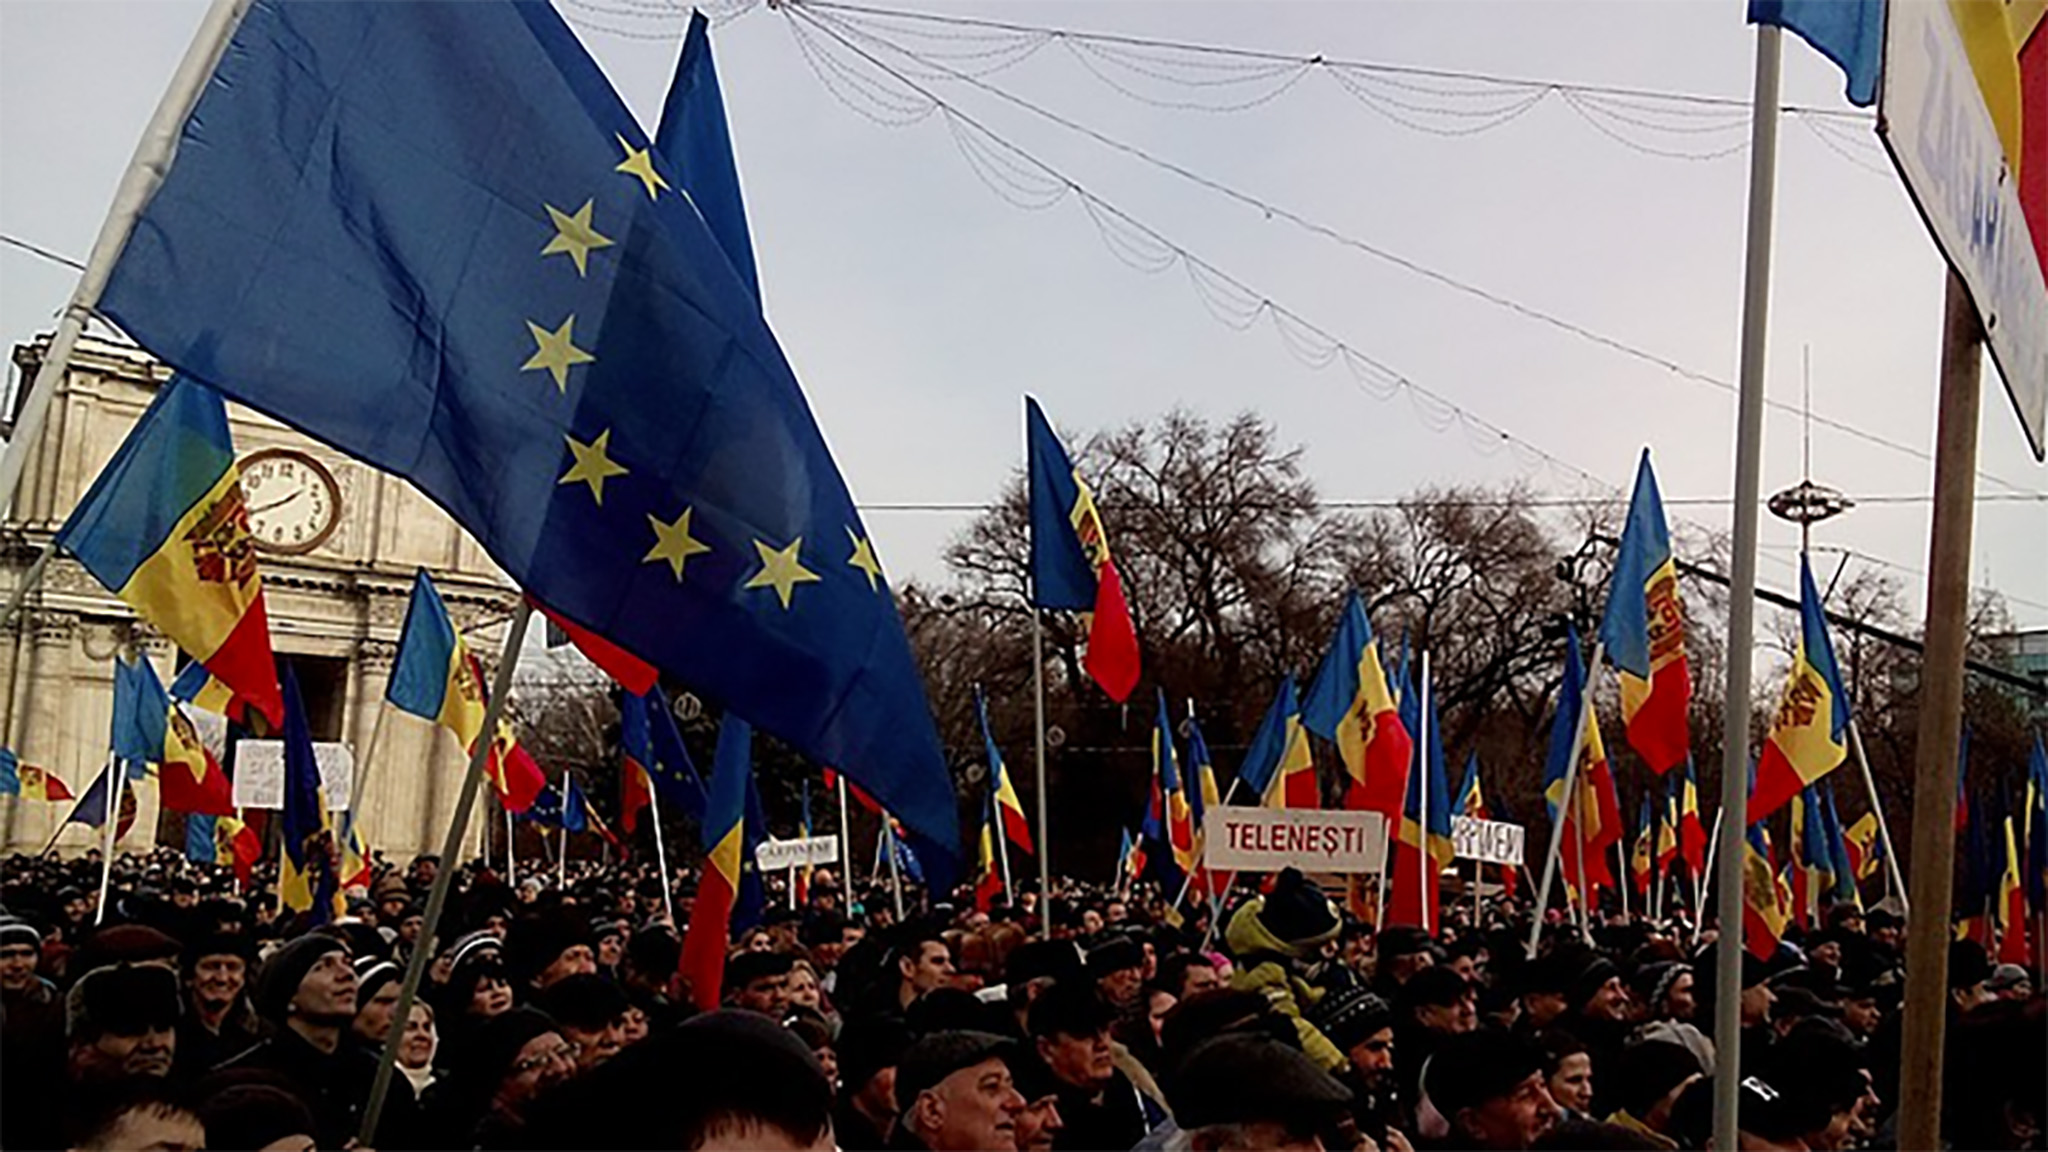 Moldovans demonstrate in Chisinau, the capital, in support of closer ties to Europe in 2016. Six years on, those aspirations yielded a start to Moldova’s formal accession talks with the European Union in June. (Giku/CC License 1.0)